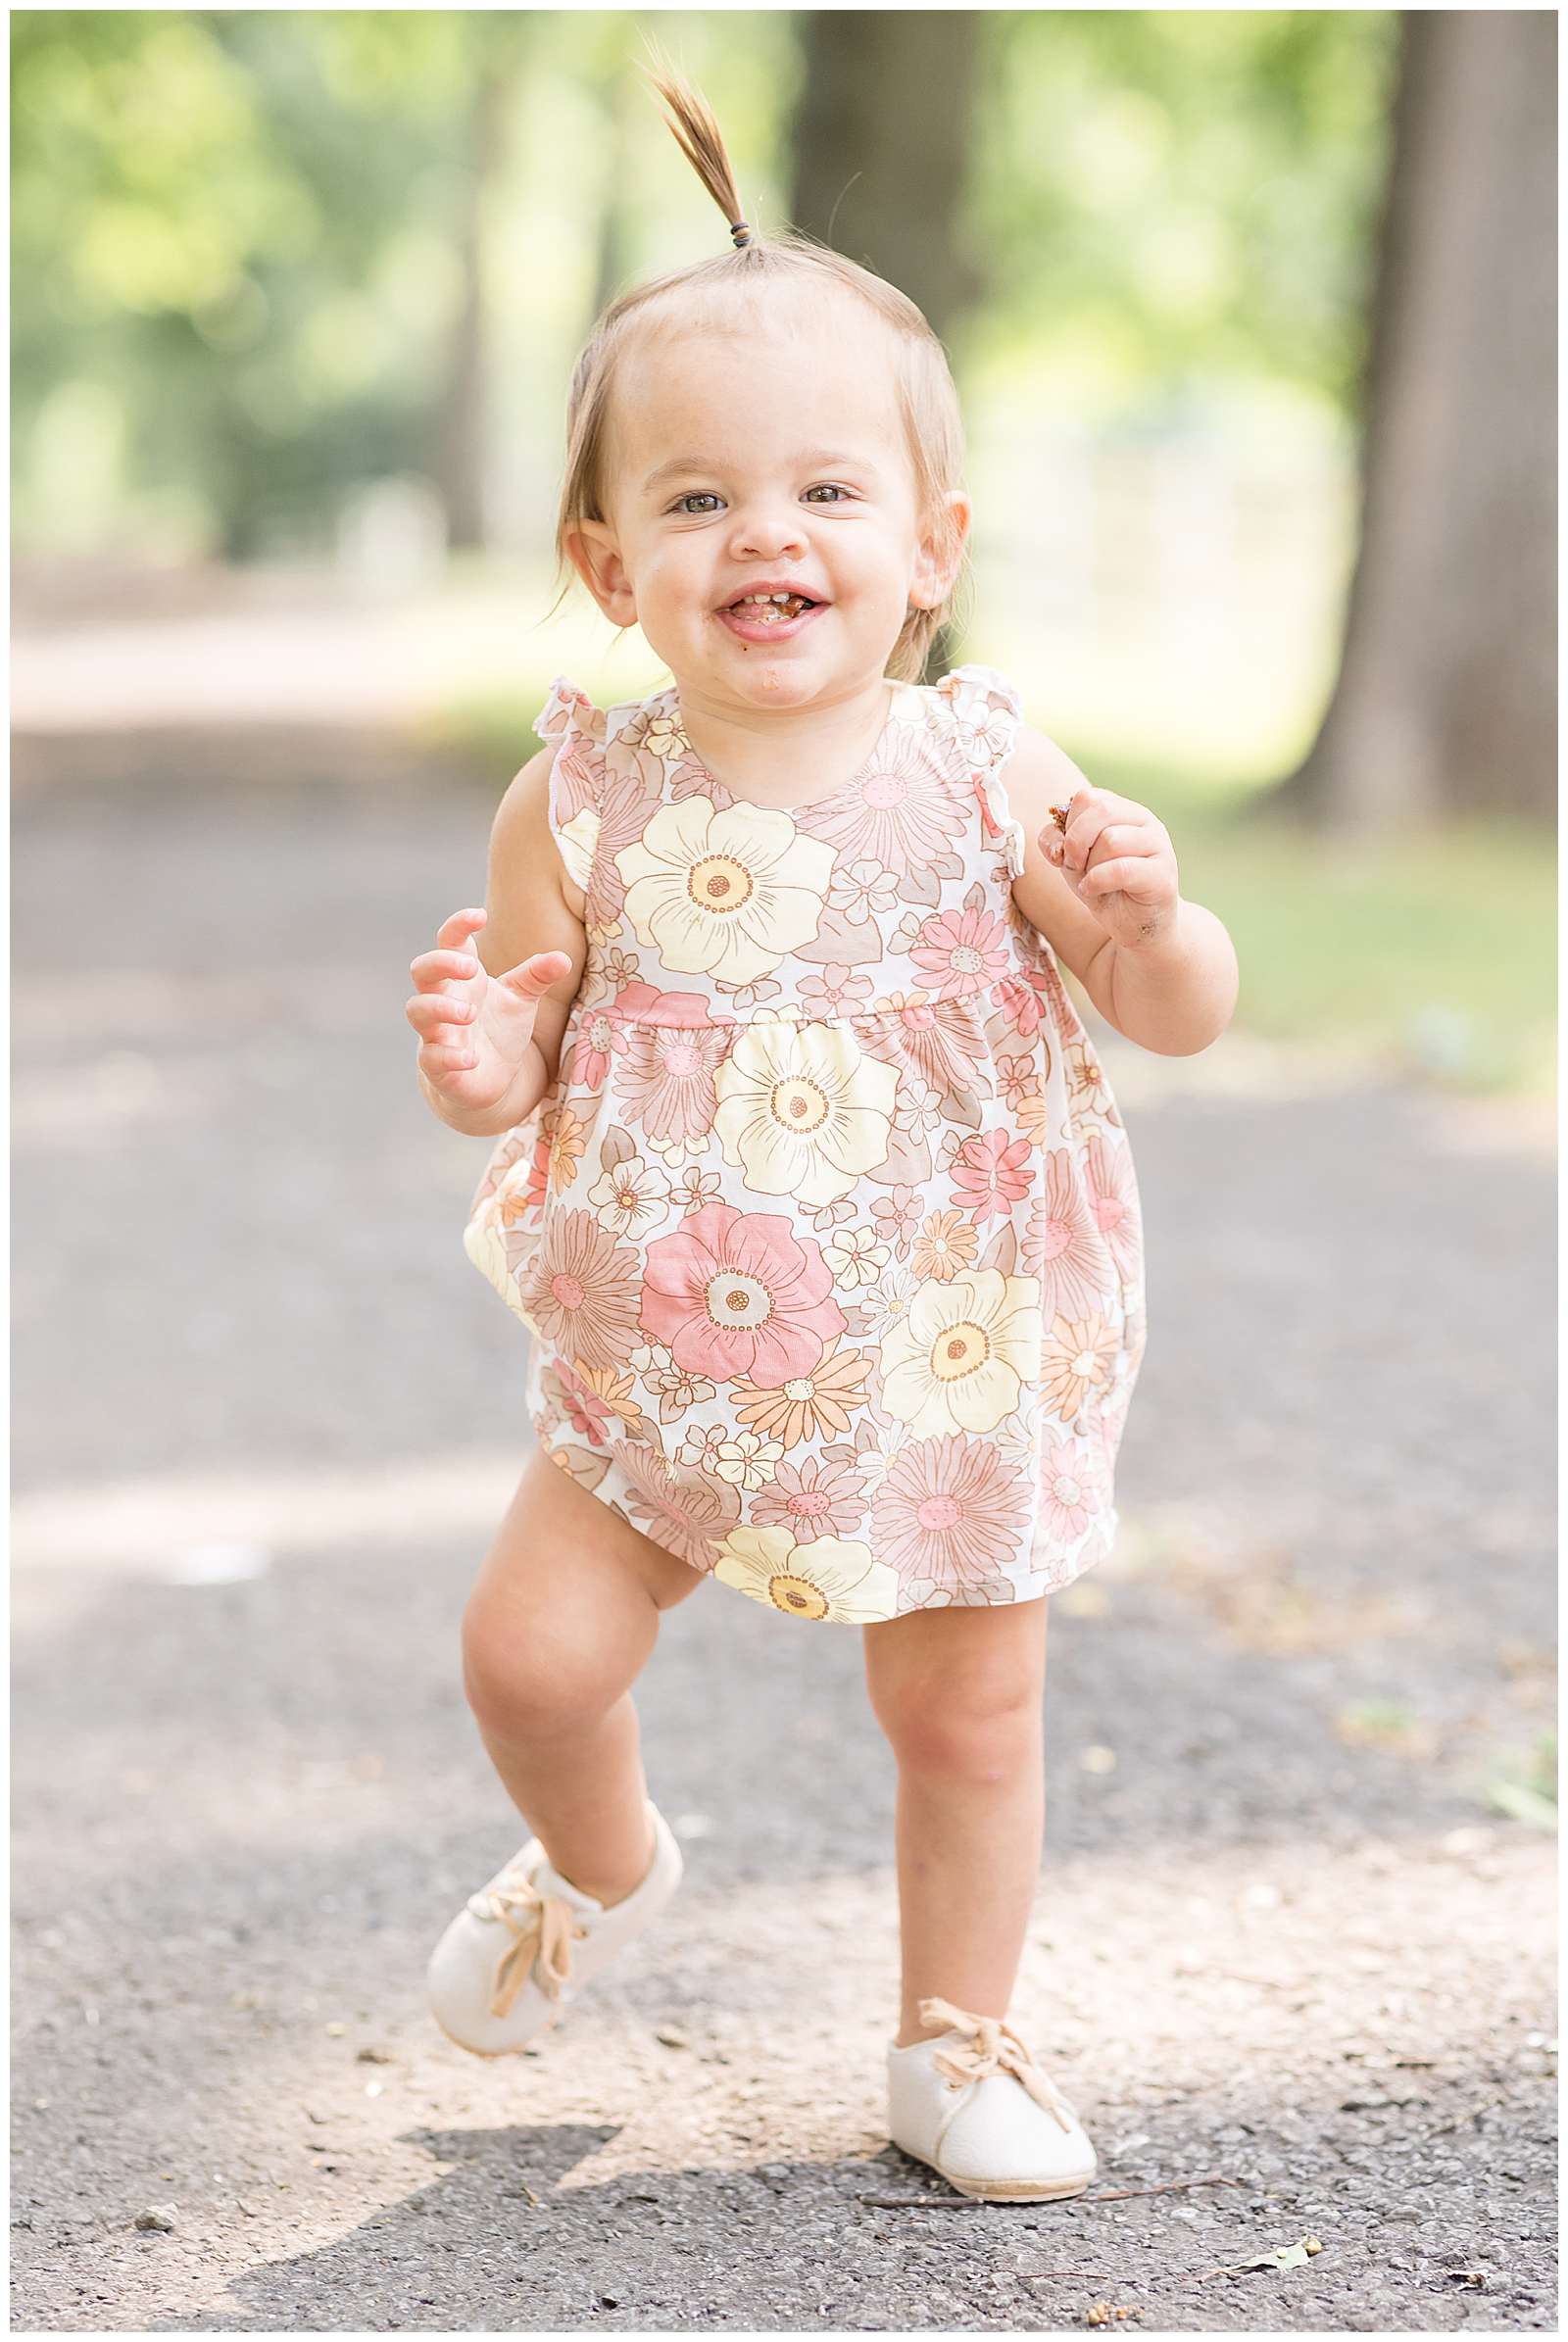 One year old girl walks along a pathway with a big grin and her tongue sticking through her teeth as she walks towards Rebecca Rice Photography. Click now to see more of this cutie and go behind the scenes with Rebecca Rice for her photography education membership. -rebeccaricephoto.com